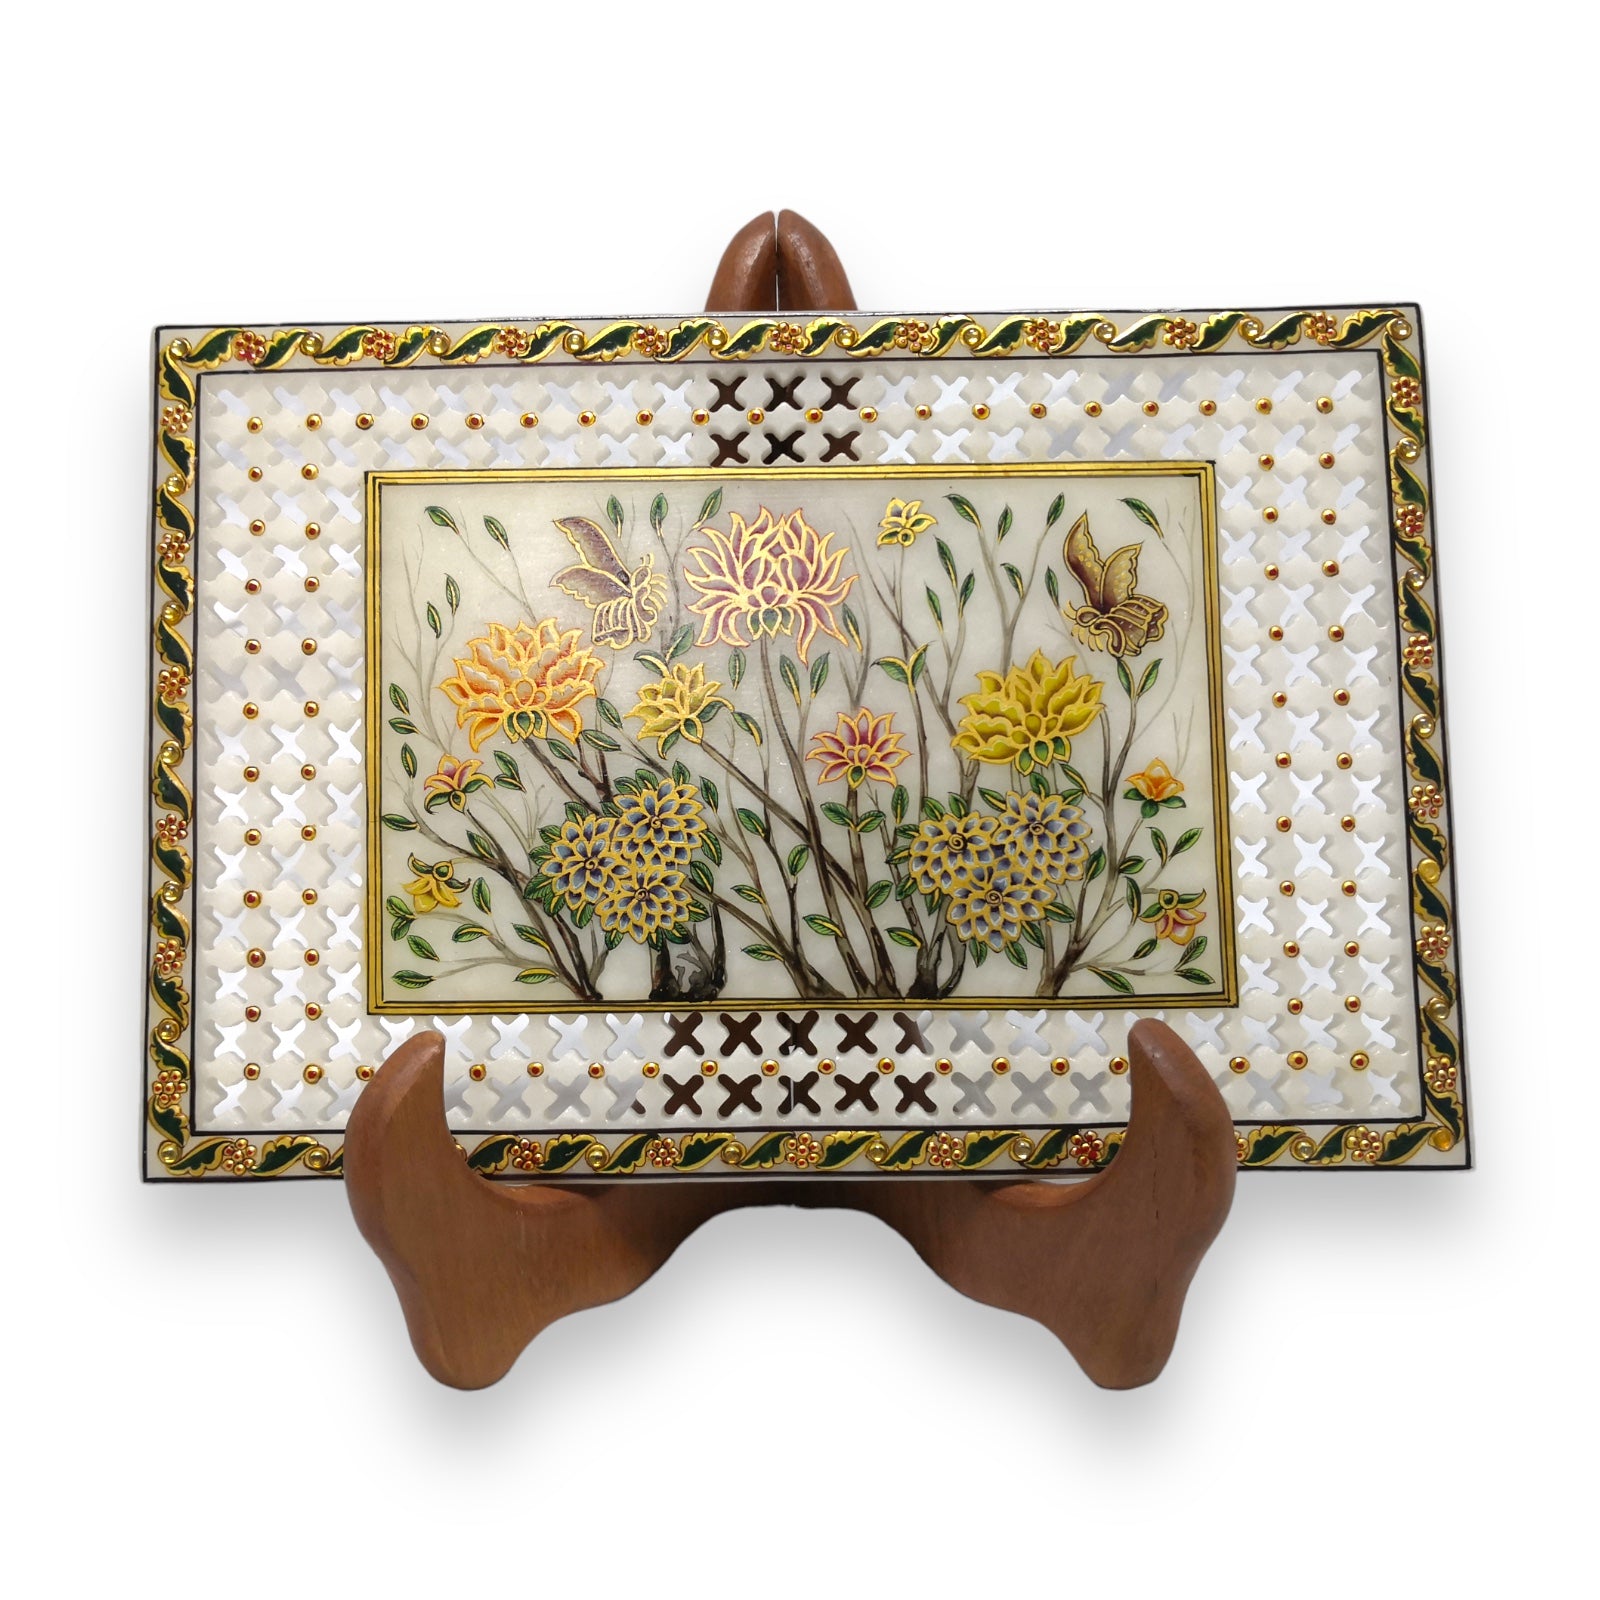 Marble 24K Gold Handcrafted Floral Enamel Stone Plate with Sheesham Wood Stand